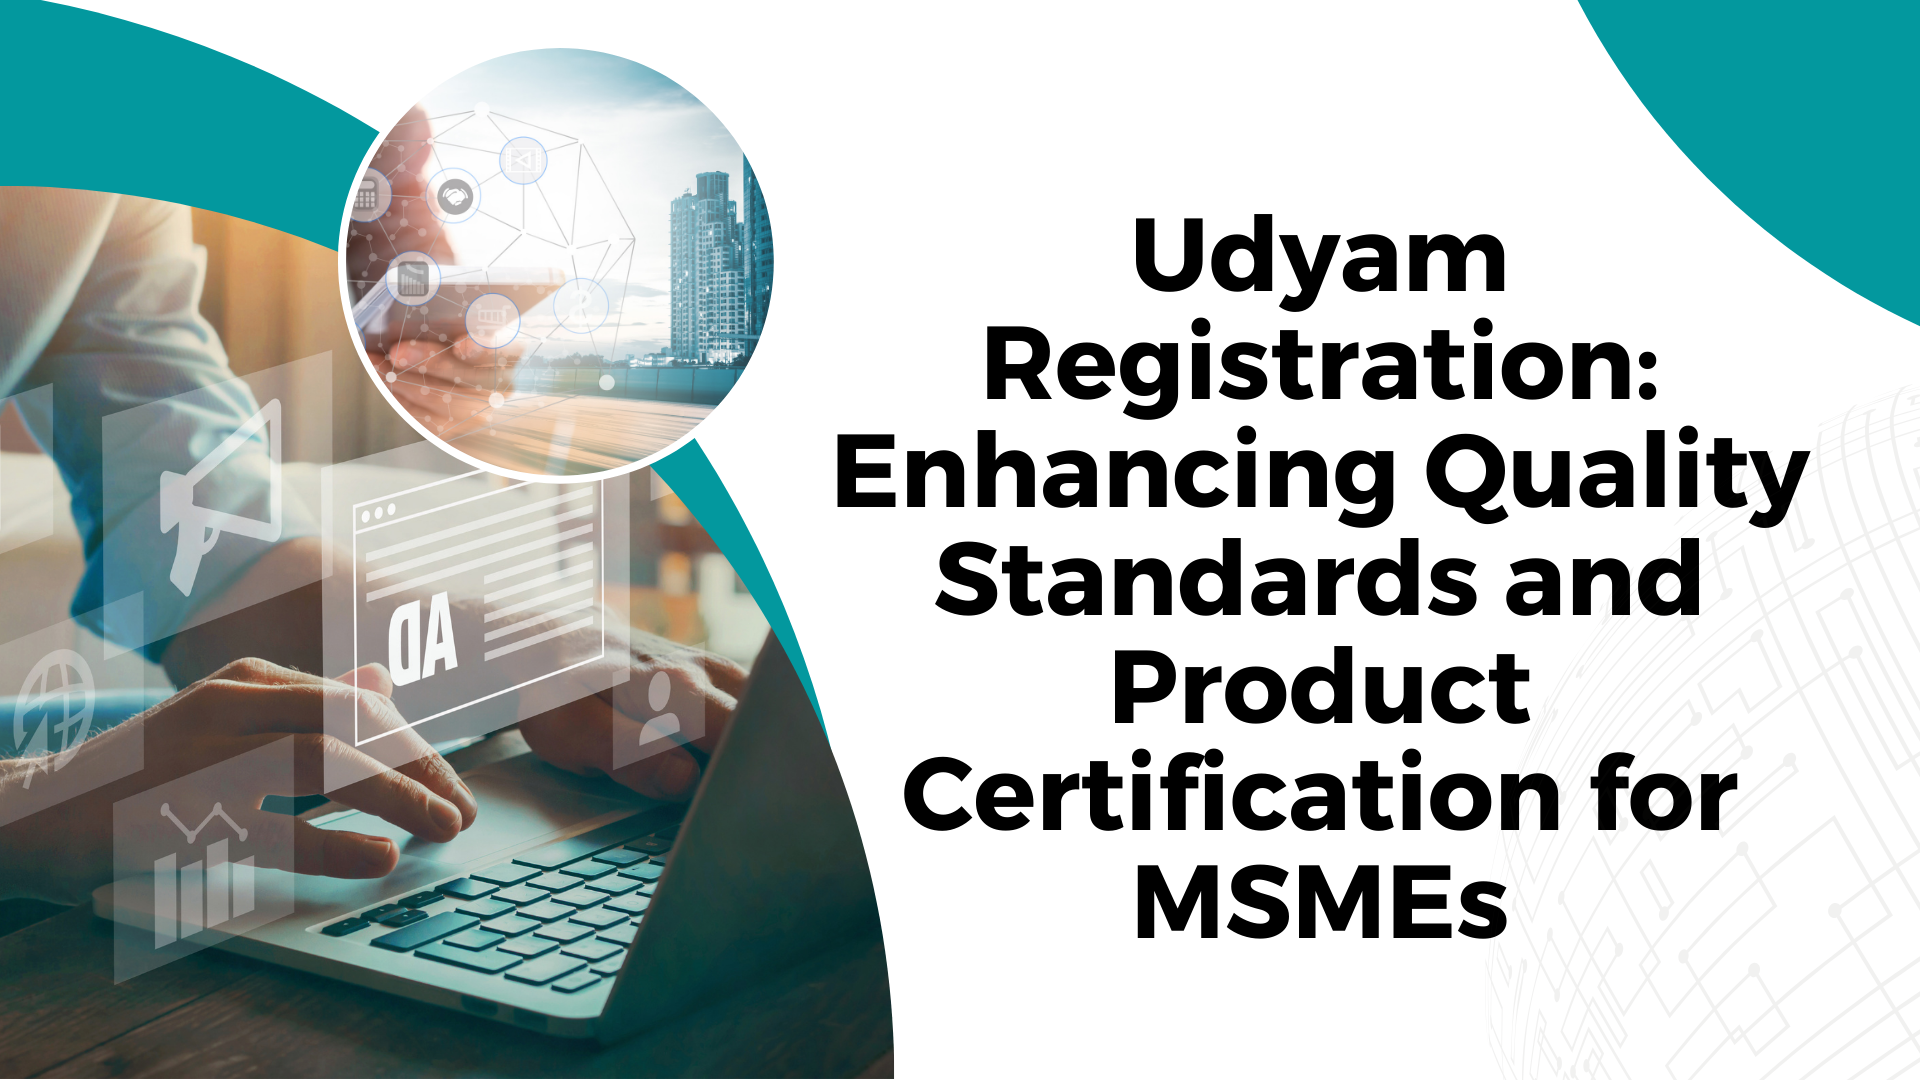 Udyam Registration Enhancing Quality Standards and Product Certification for MSMEs